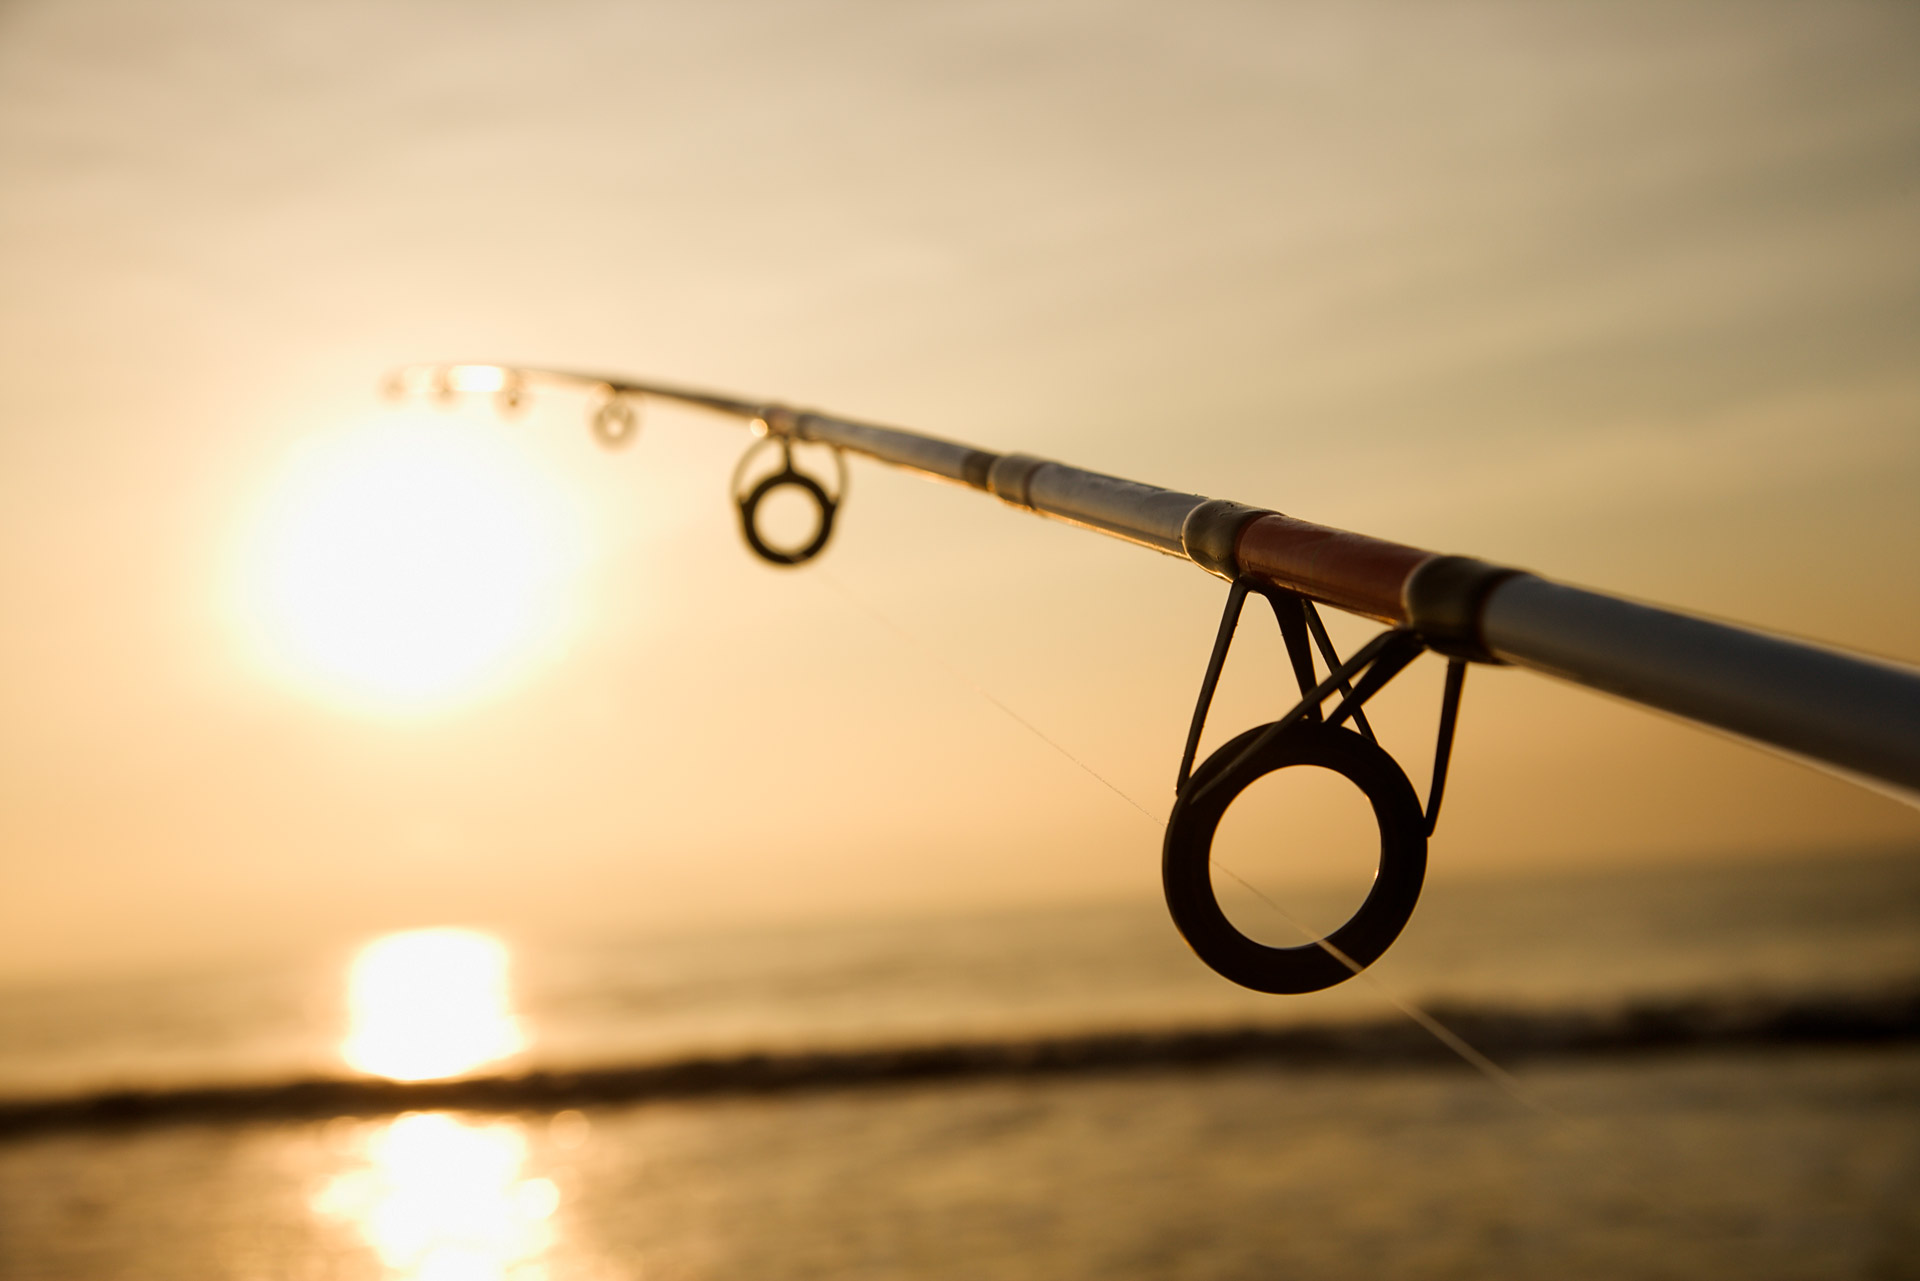 Fishing rod length and action in a sunset